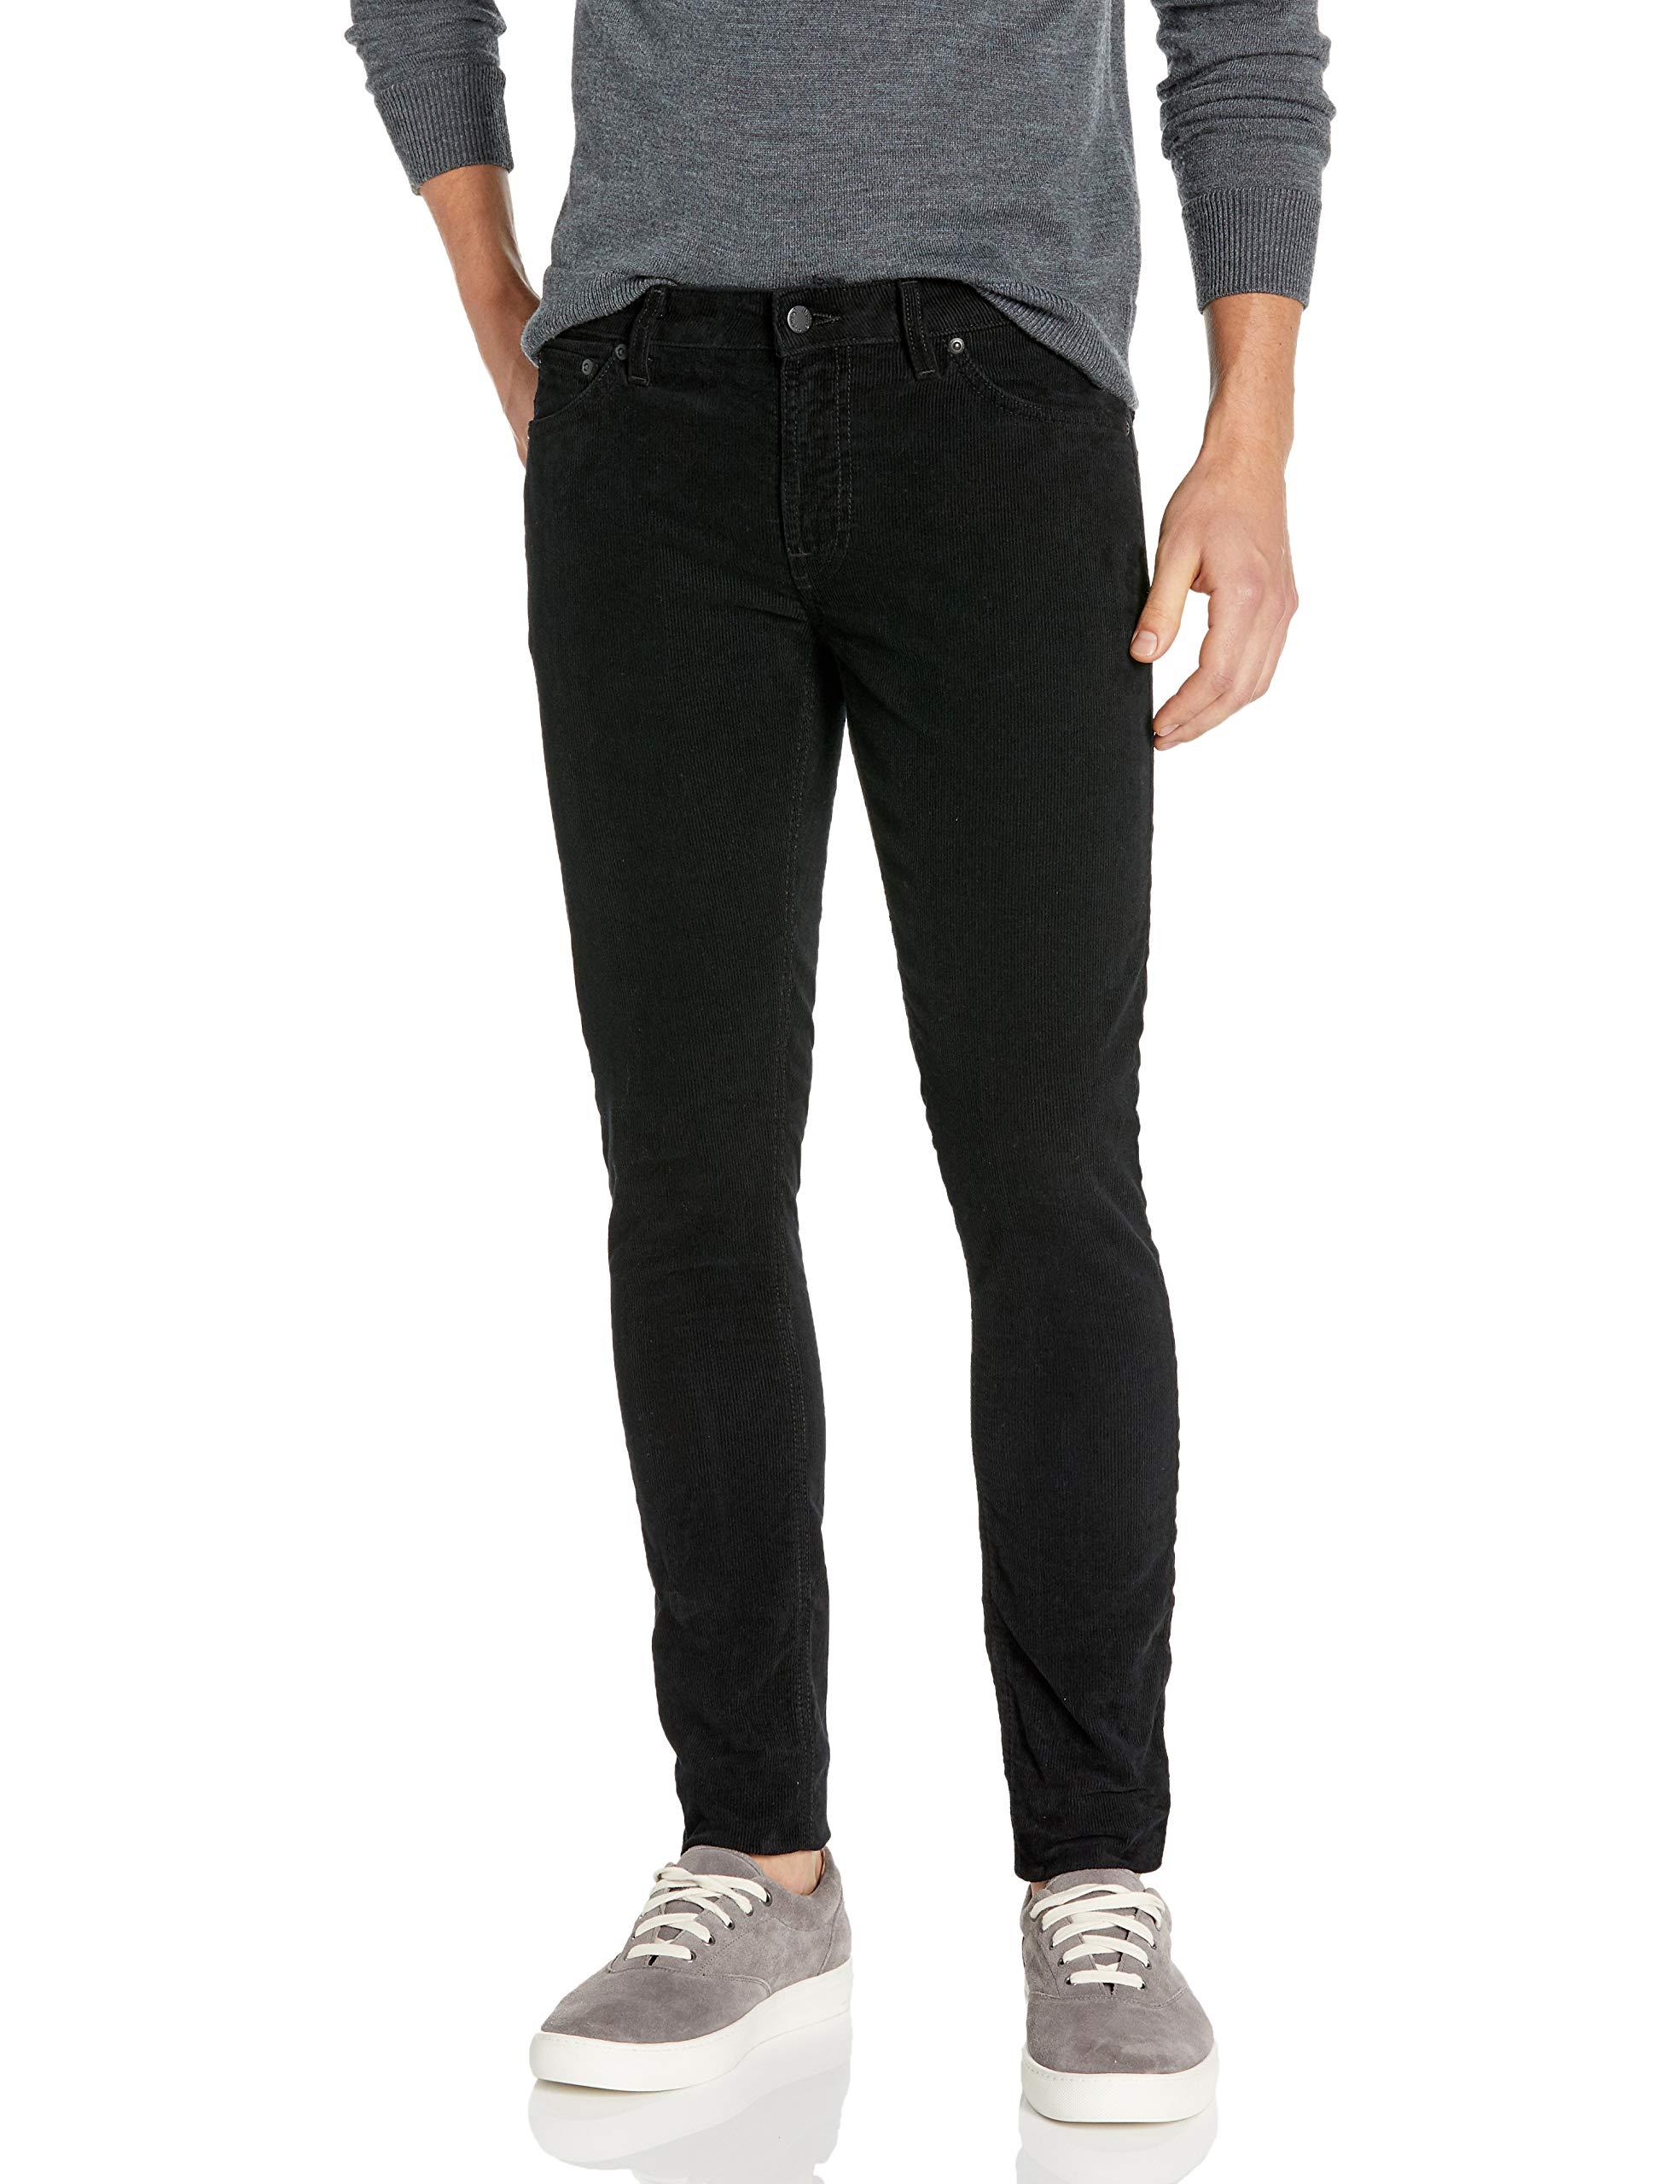 Nudie Jeans Cotton Adult's Skinny Lin Black Cord - Save 23% - Lyst